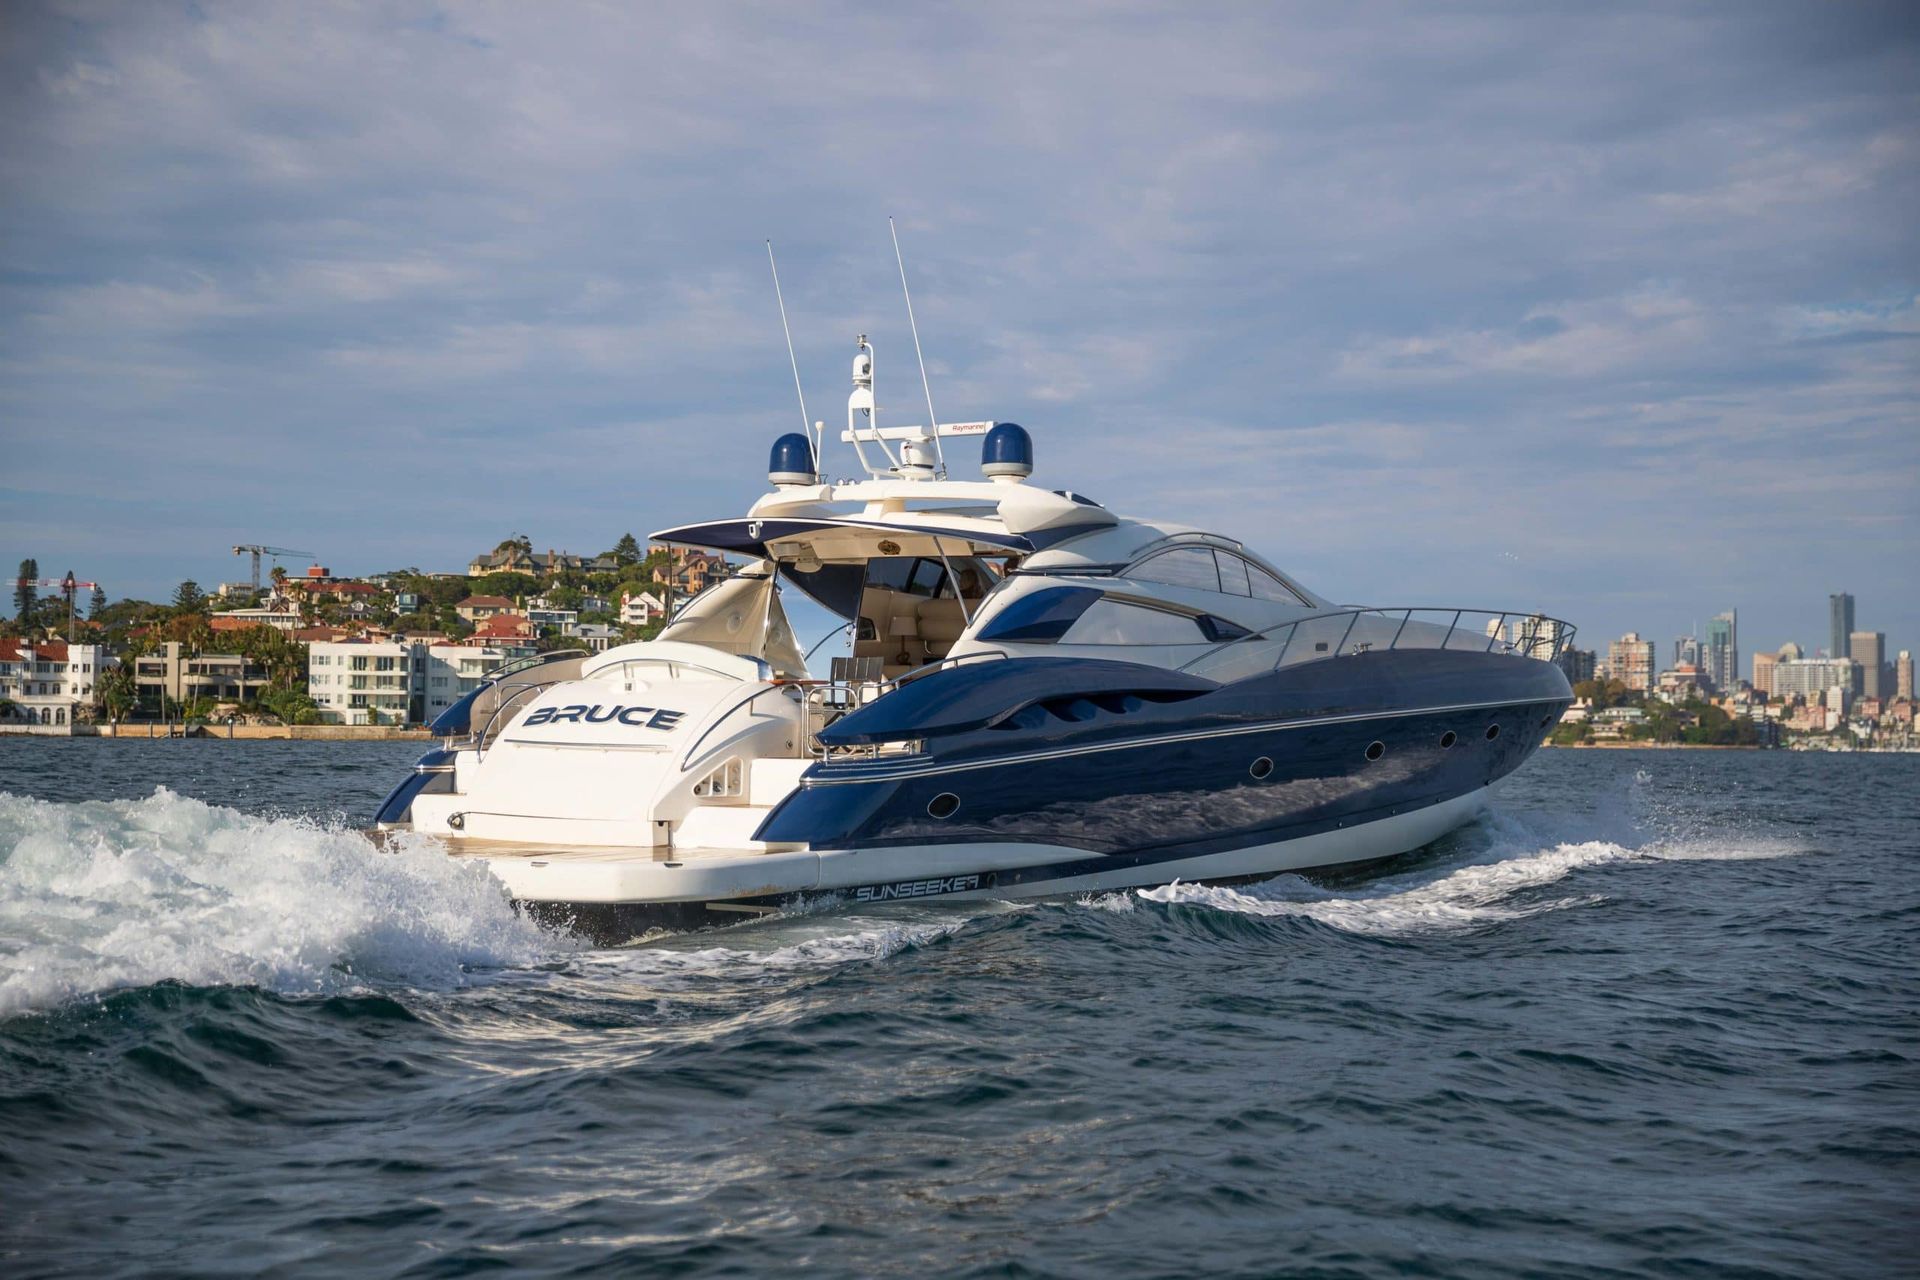 MV BRUCE | From $1,125 Per Hour | 10 Guests